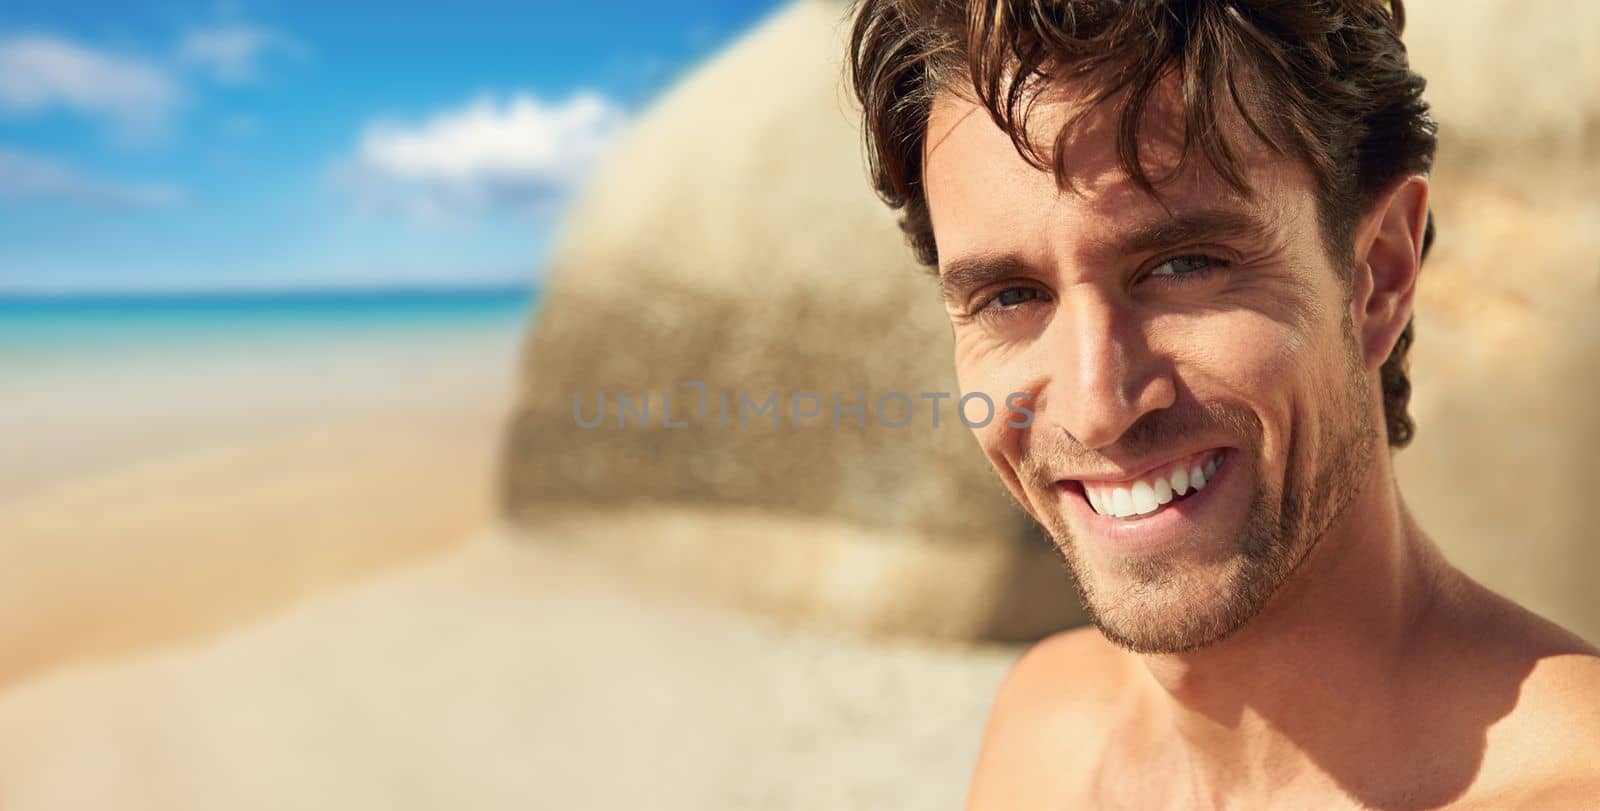 The beach is his happy place. Cropped portrait of a handsome man on a tropical beach. by YuriArcurs